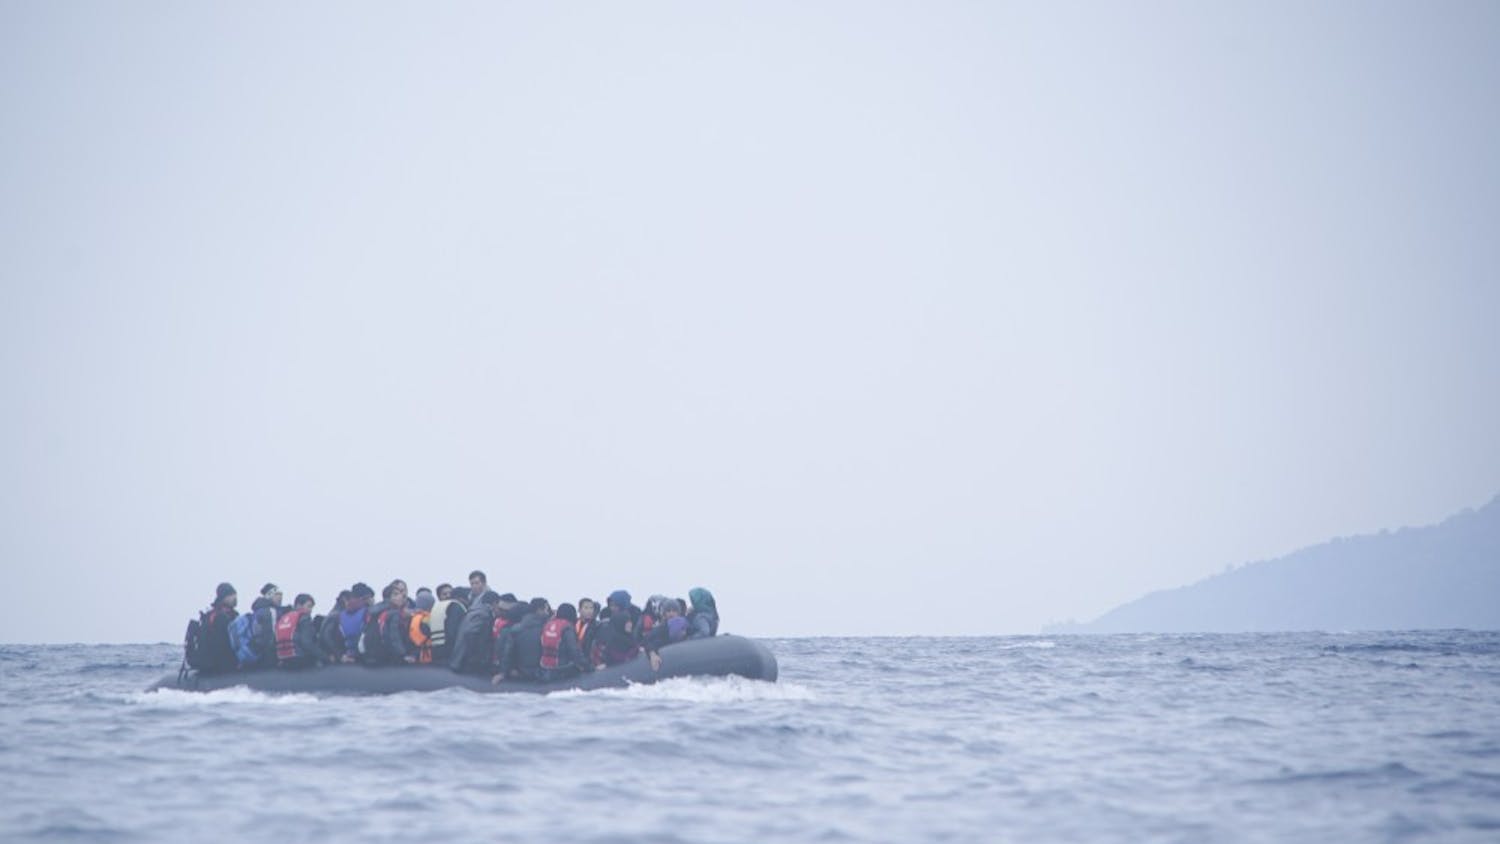 Refugees_on_a_boat_crossing_the_Mediterranean_sea_heading_from_Turkish_coast_to_the_northeastern_Greek_island_of_Lesbos_29_January_2016.jpg